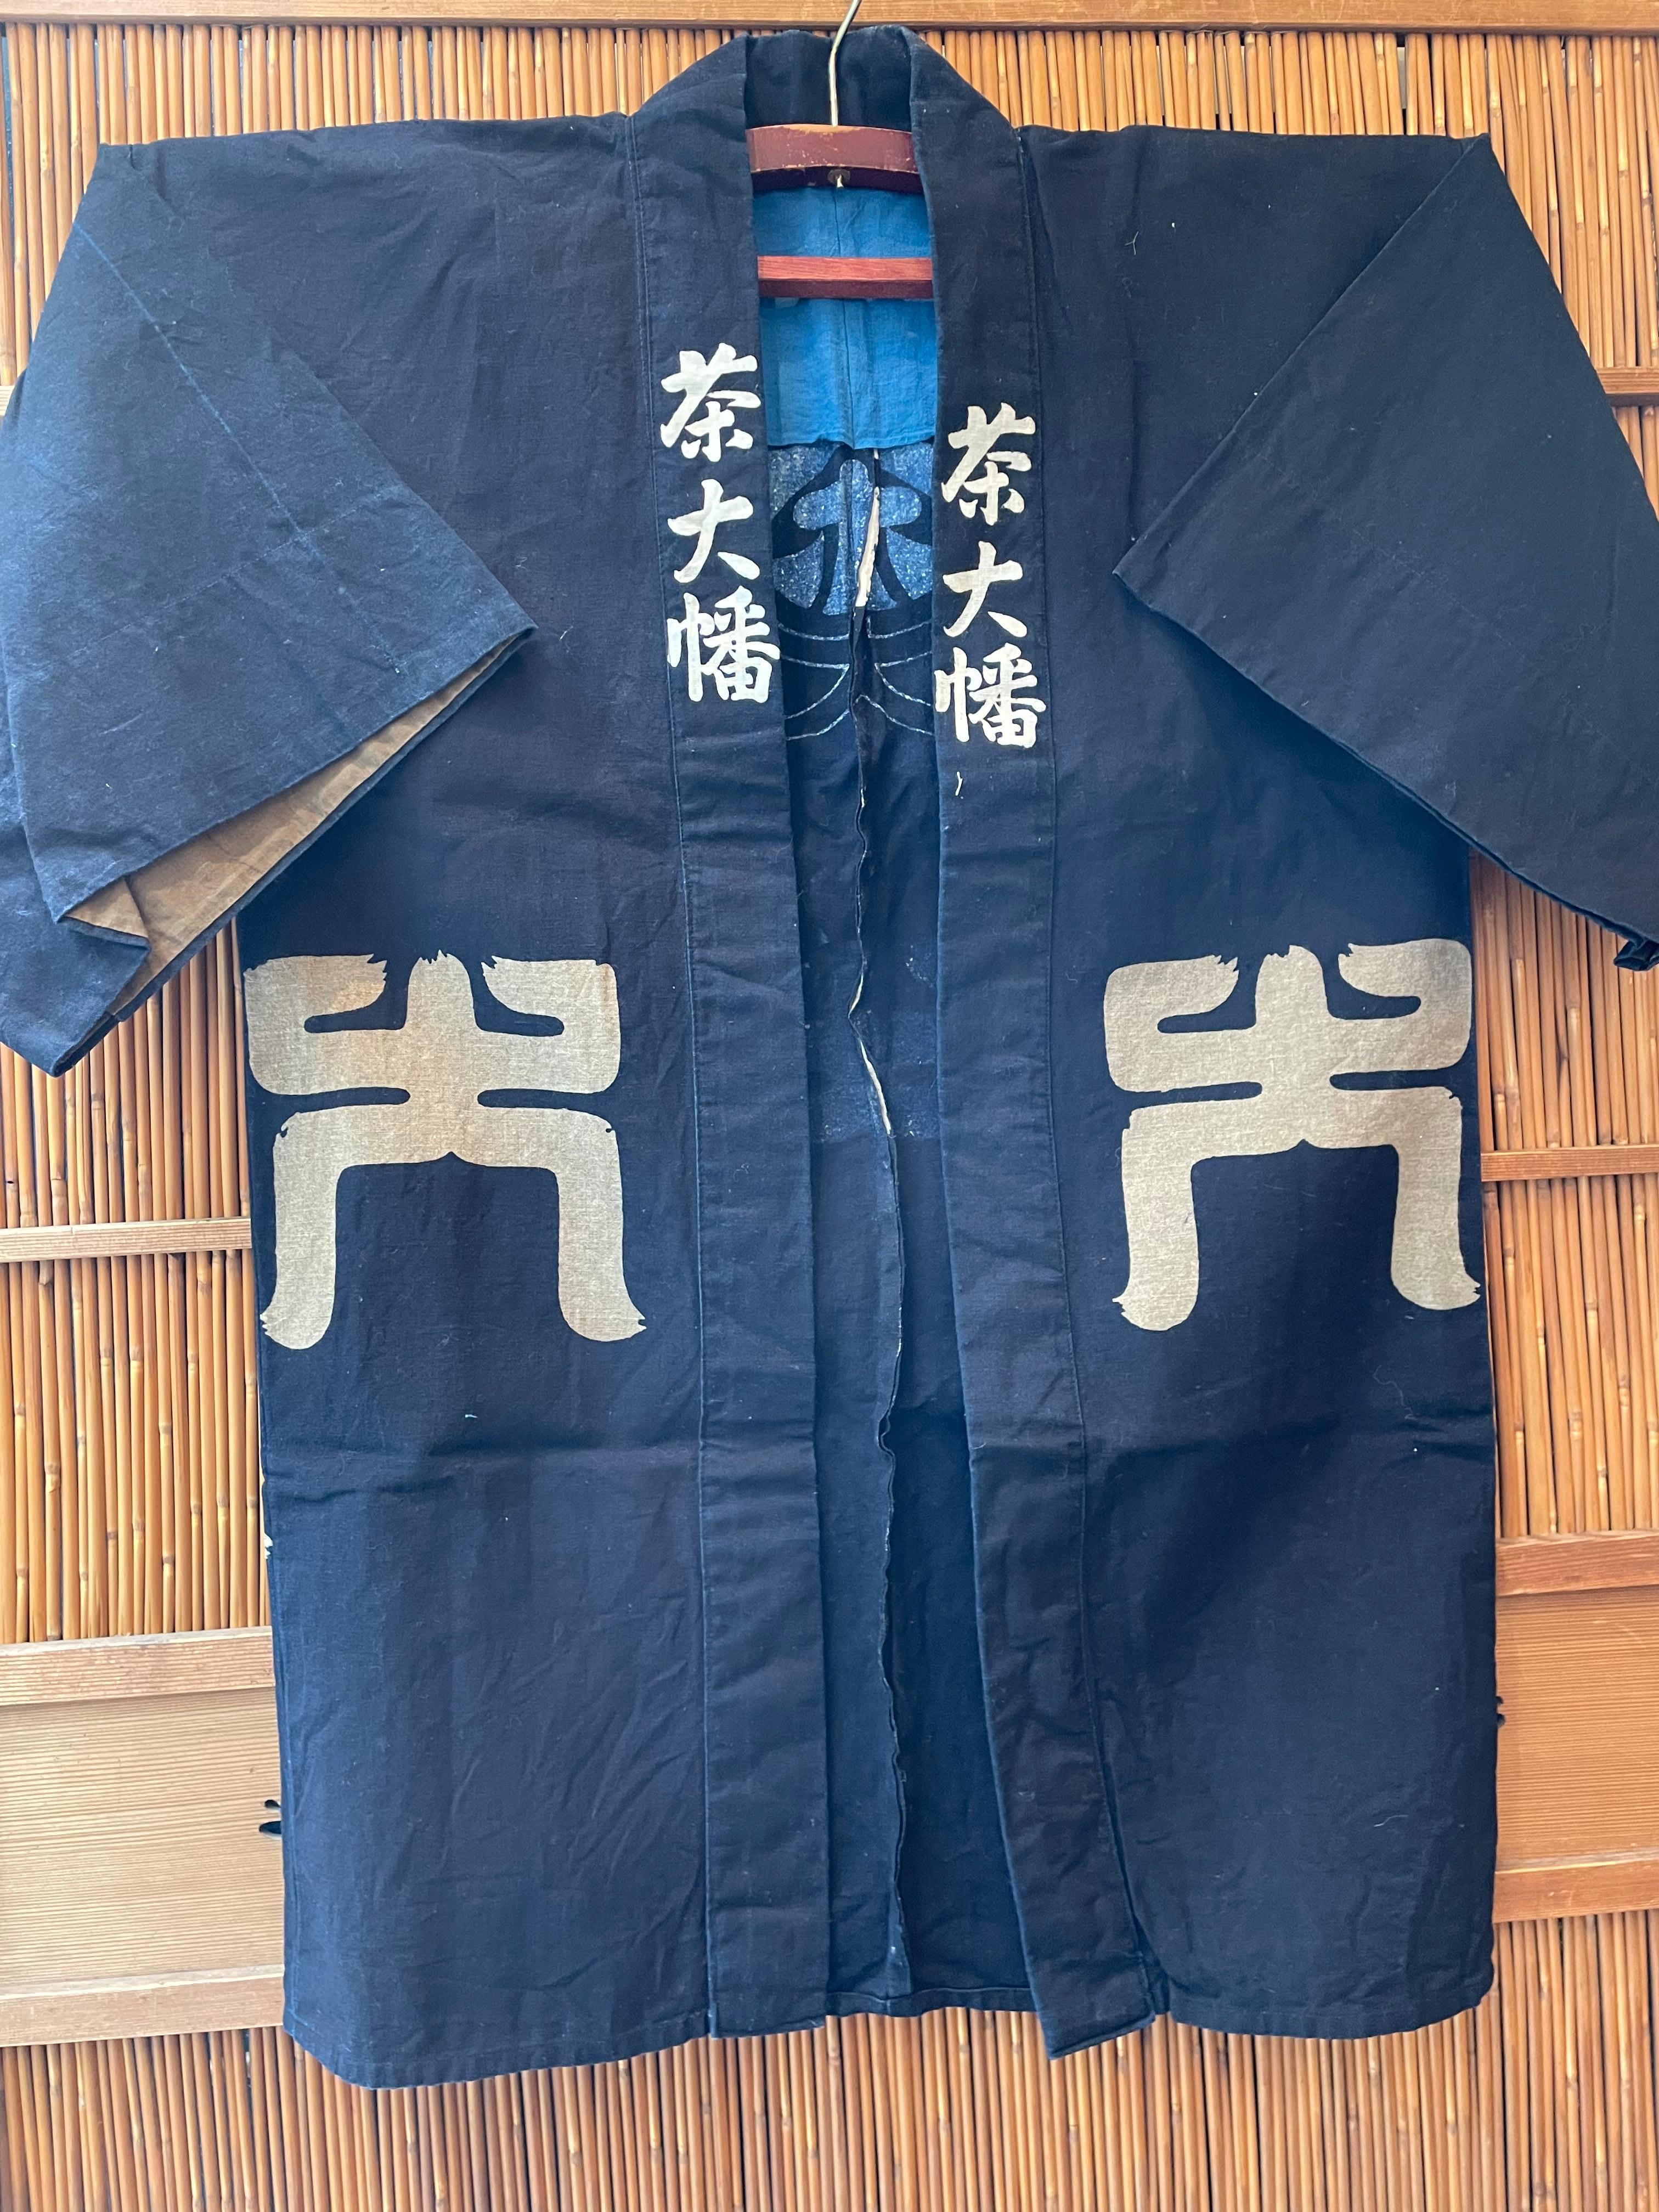 This is a jacket with cotton which was made in Japan.
These kind of jackets are called Hanten in Japanese. 
Hanten is a short jacket similar to a haori, but without a gusset. It is worn without a breast strap and without the collar folded